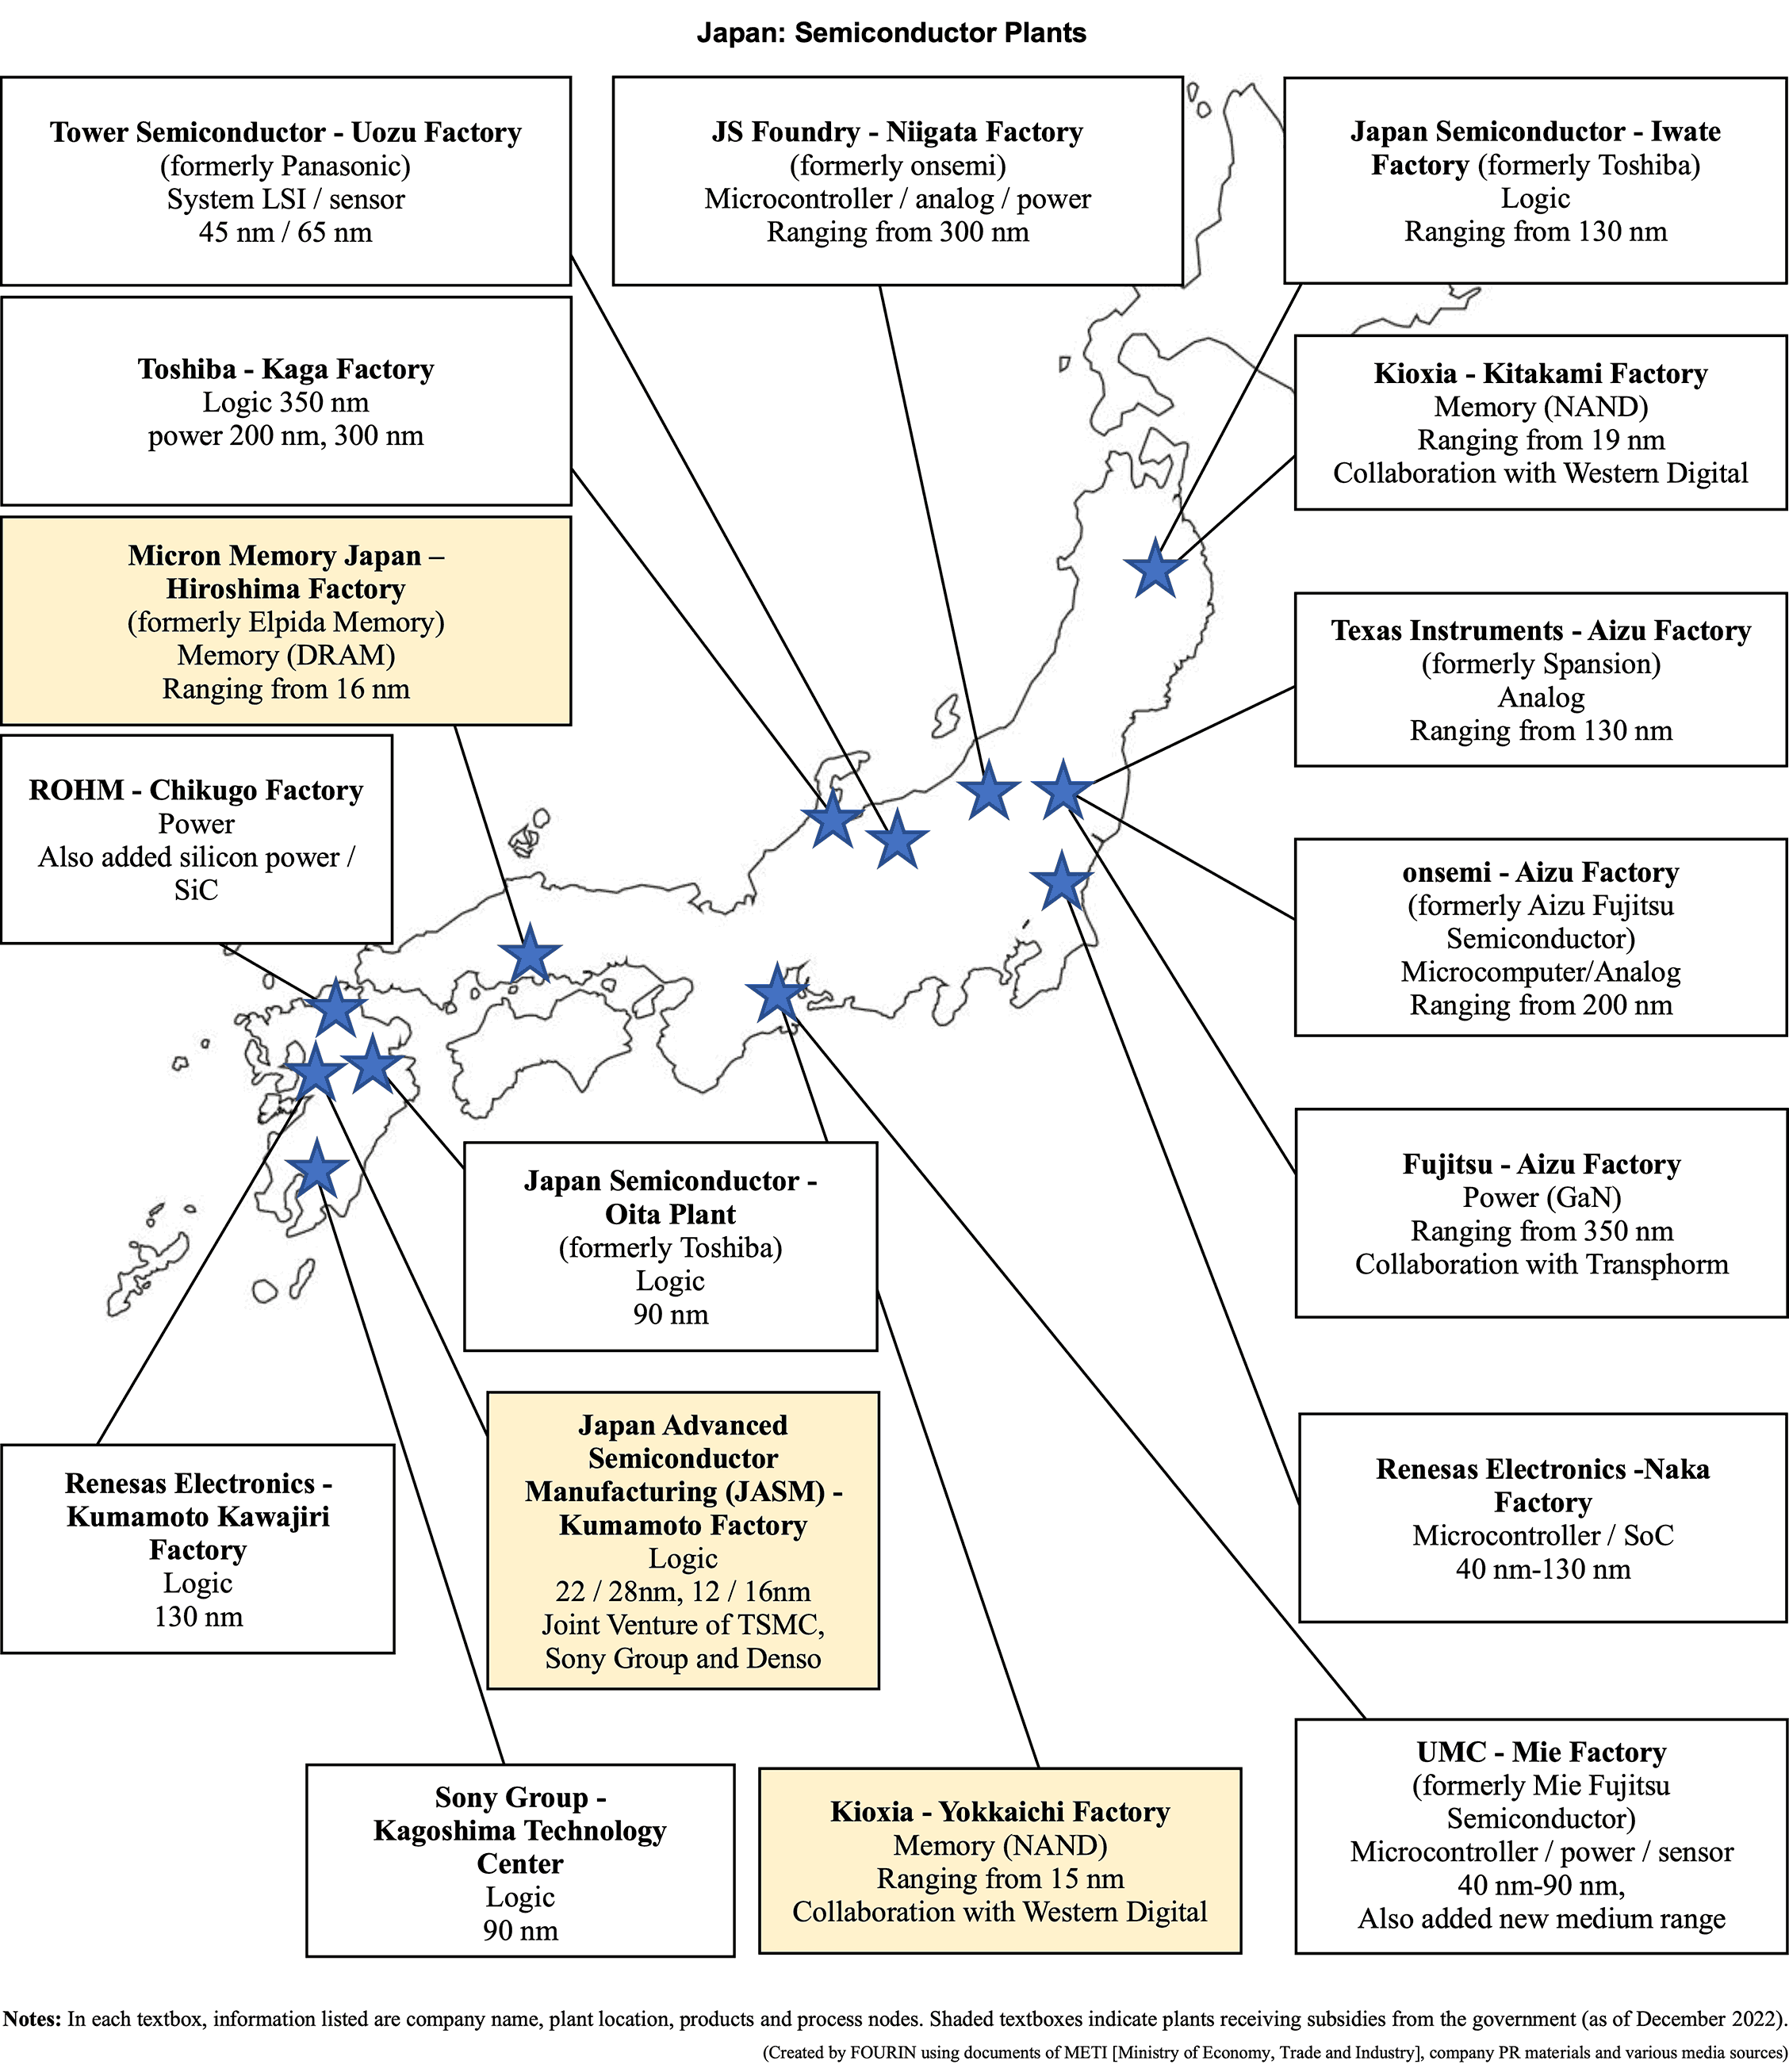 Map of Japan's Semiconductor Plants